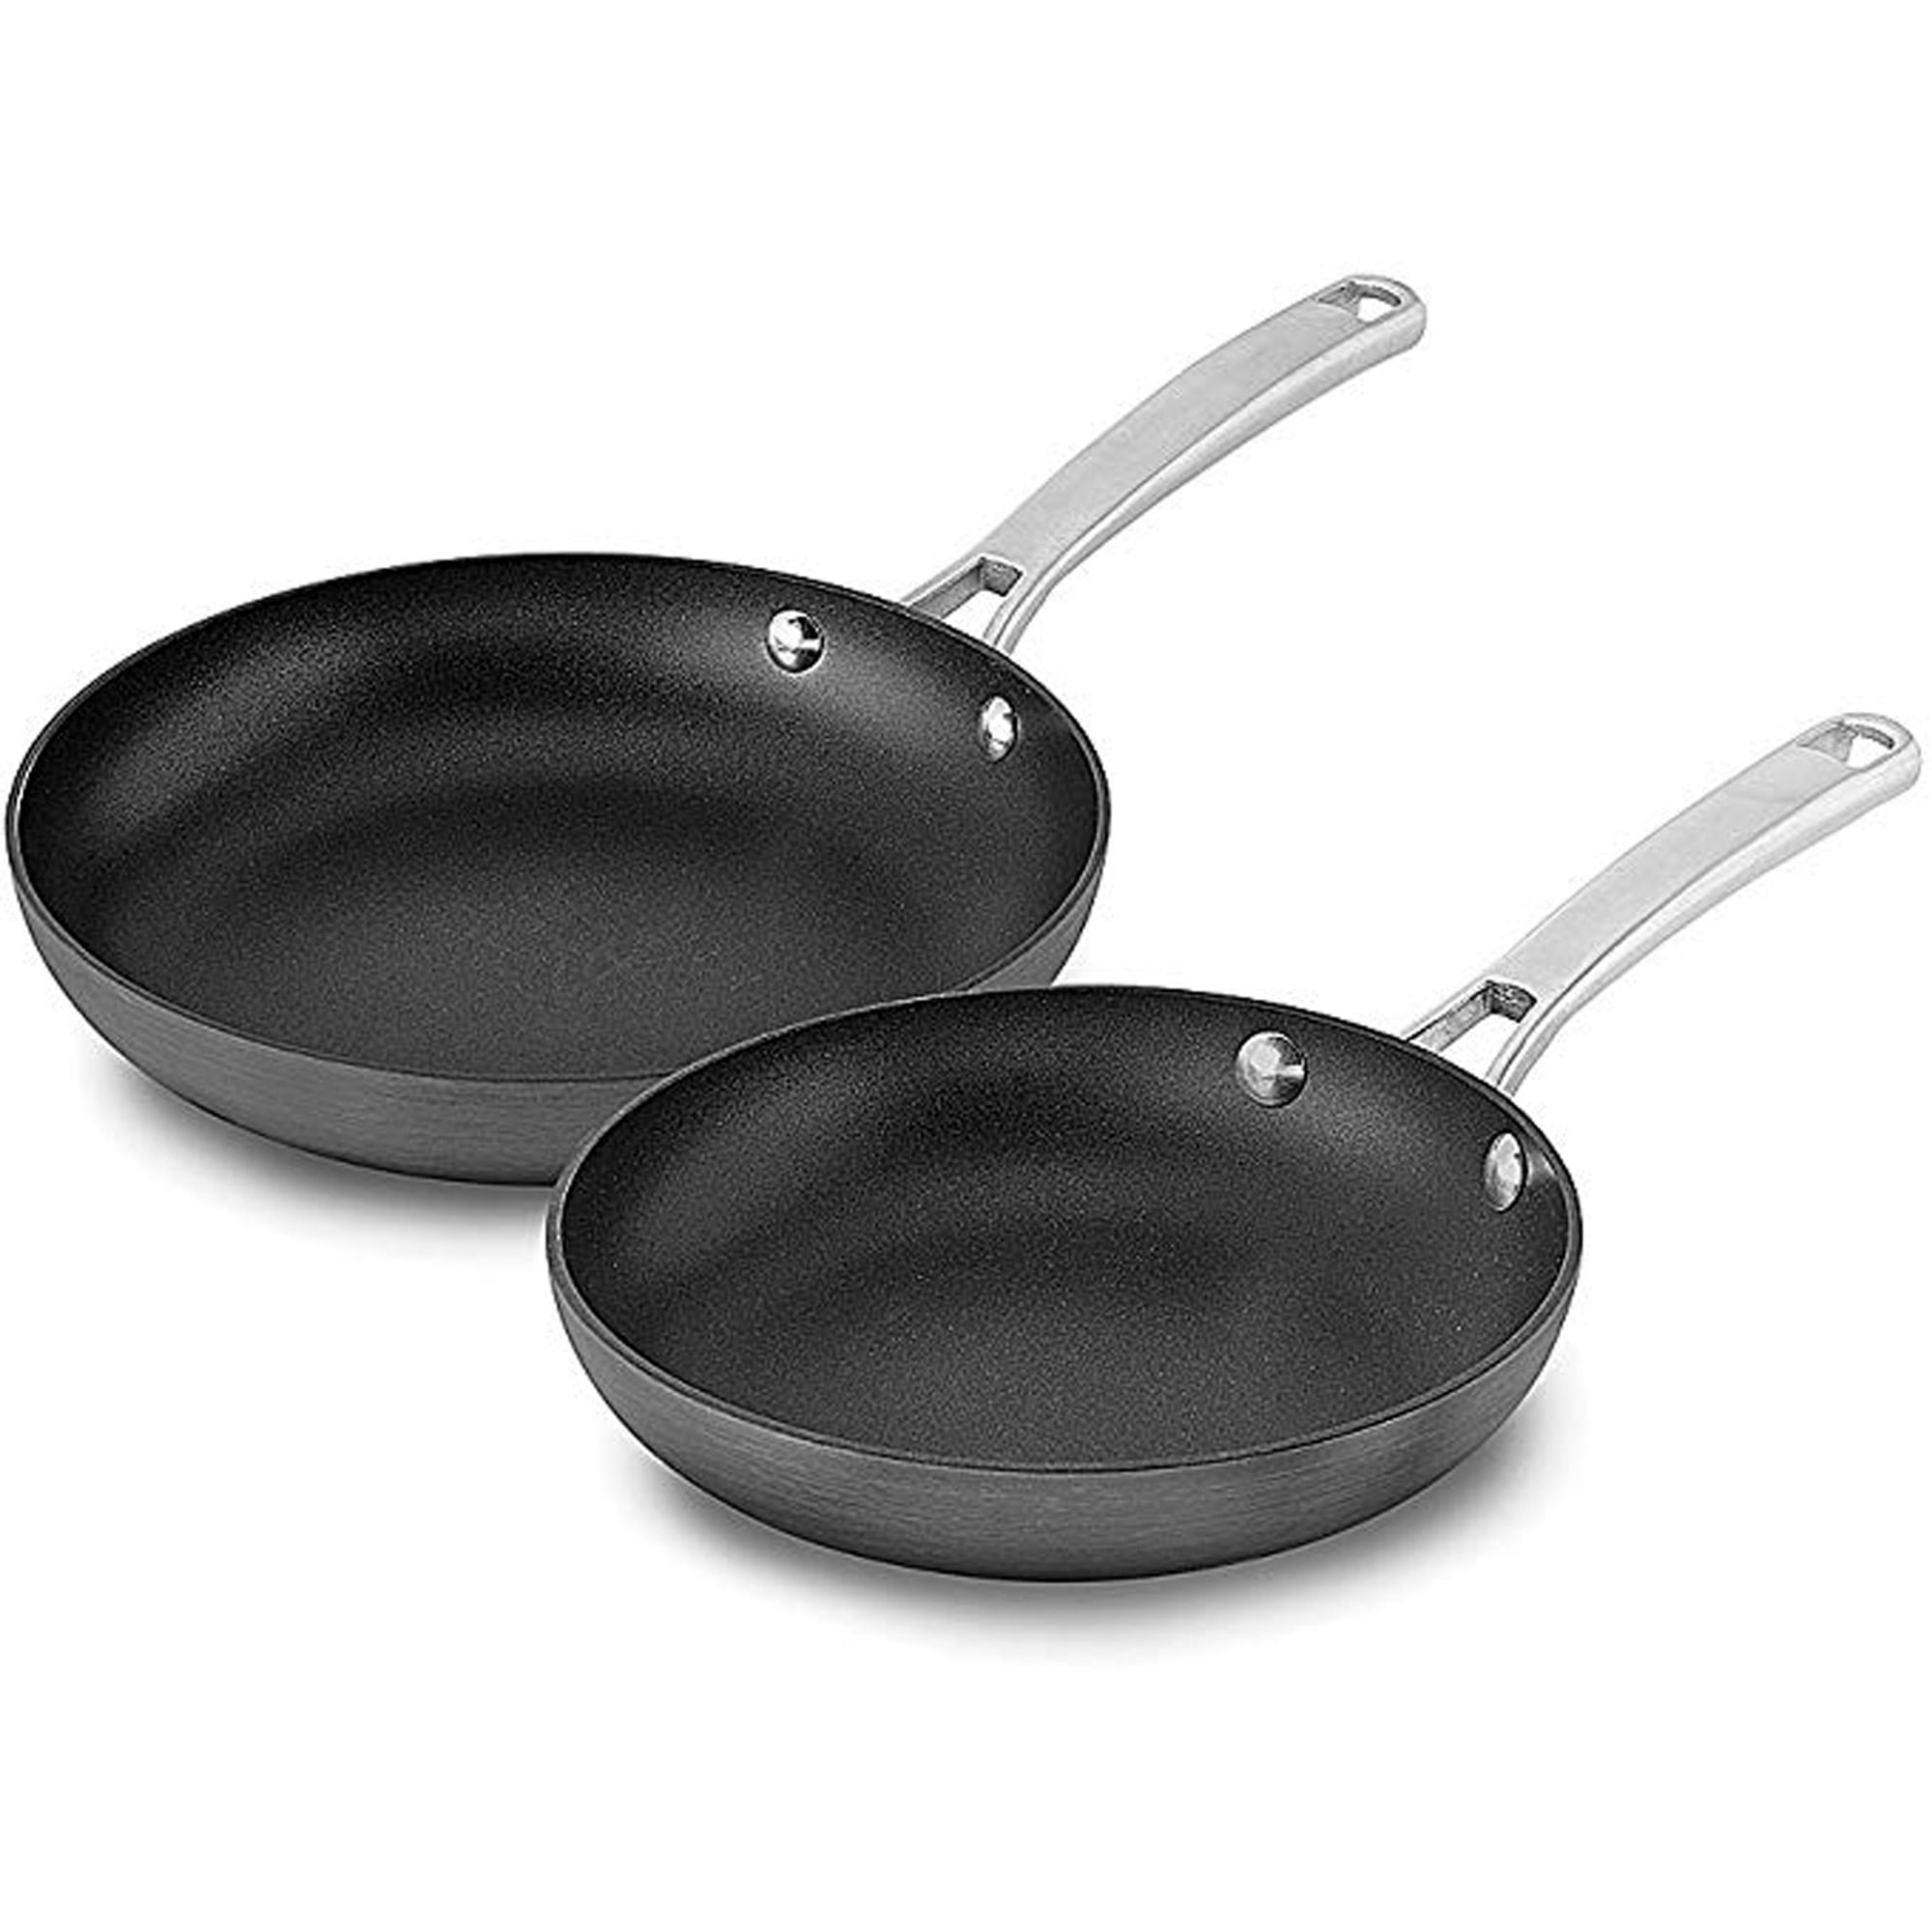 Calphalon Premier Hard-Anodized Nonstick 10-Inch and 12-Inch Fry ...